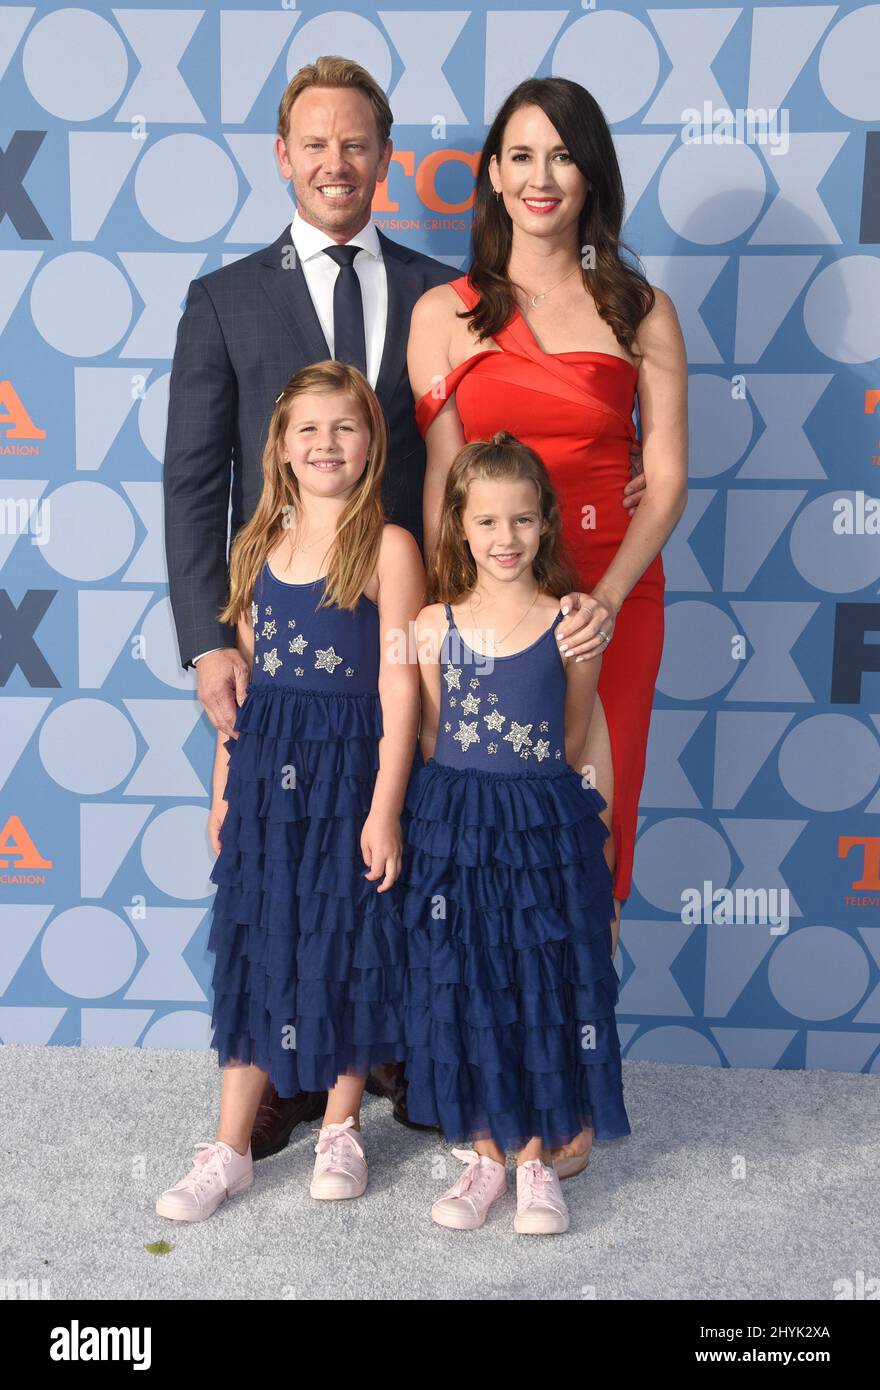 Ian Ziering, Erin Kristine Ludwig, Mia Loren Ziering and Penna Mae Ziering at the FOX Summer TCA 2019 All-Star Party held at FOX Studios on August 7, 2019 in Culver City, CA. Stock Photo